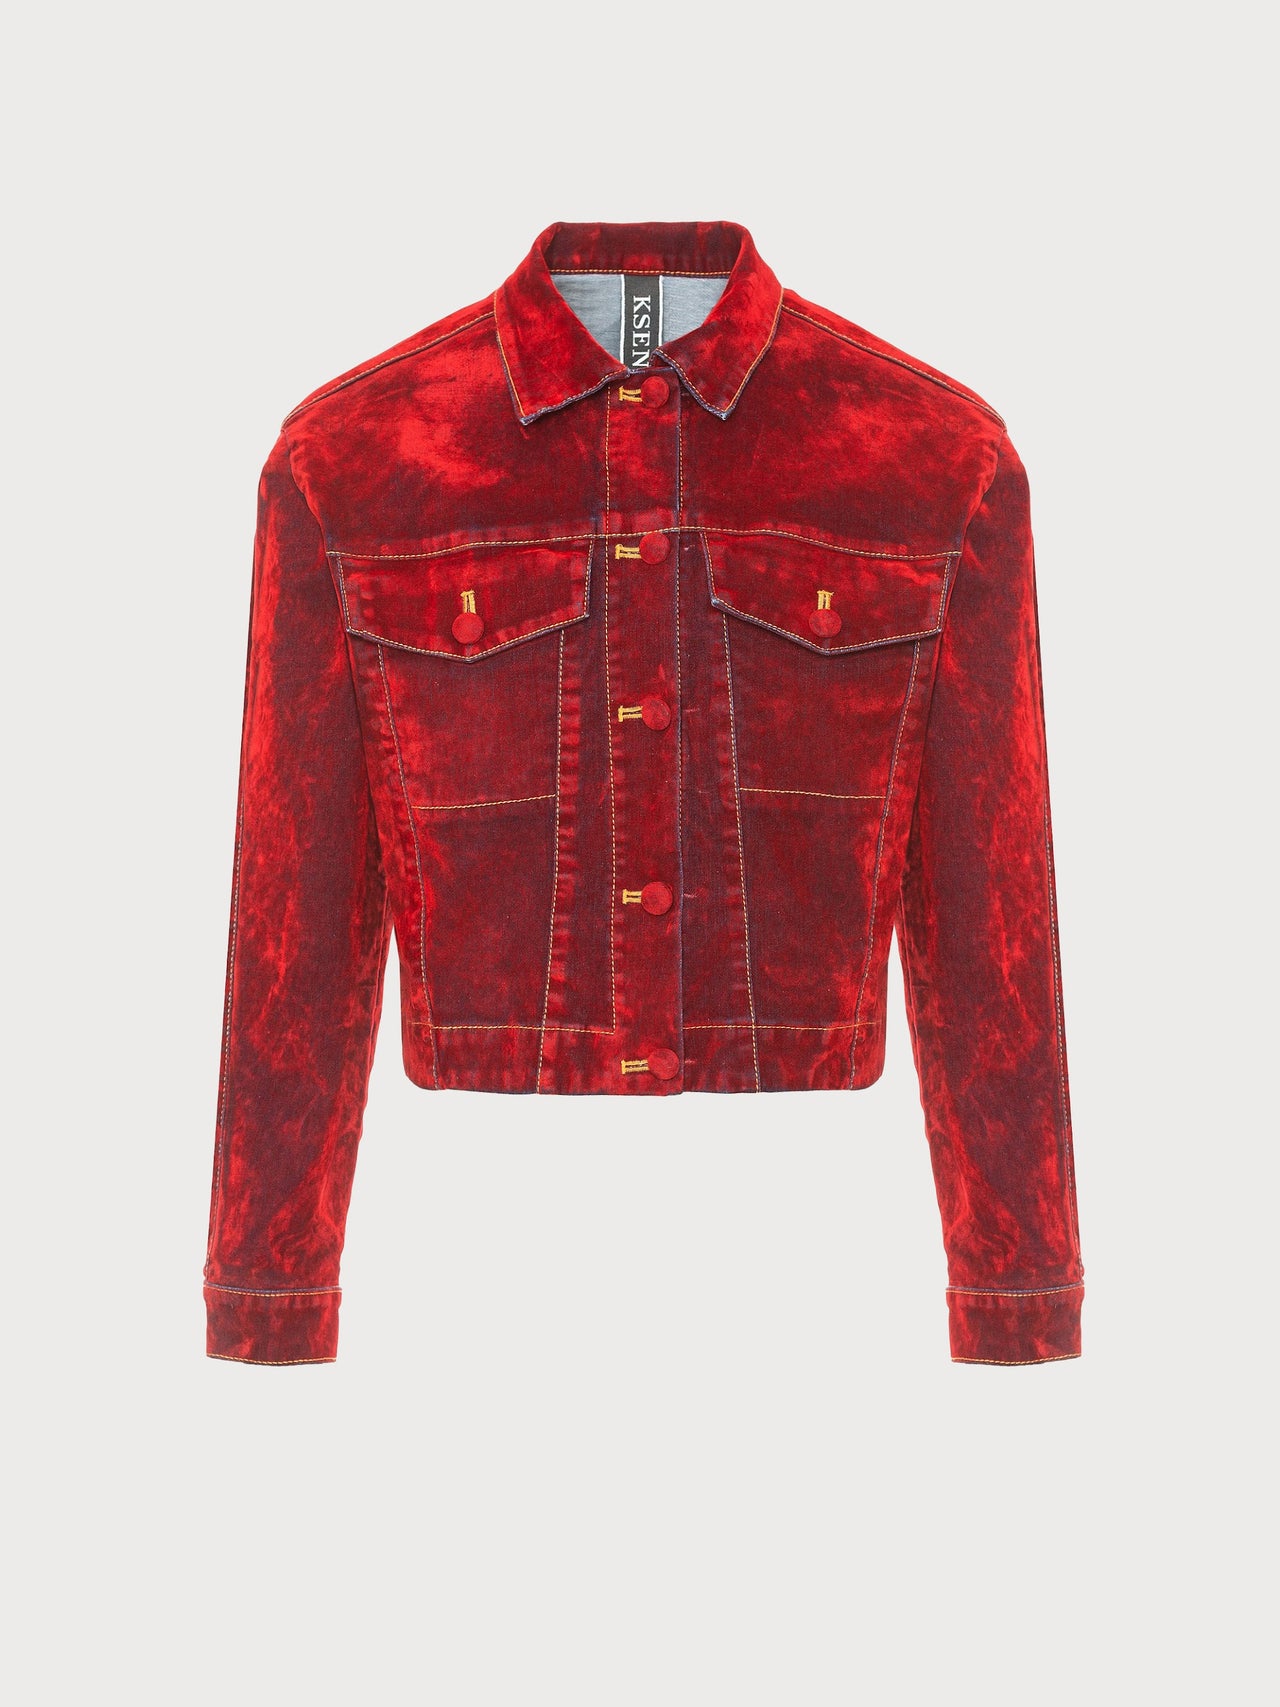 Denim Jacket Covered in Red Velours